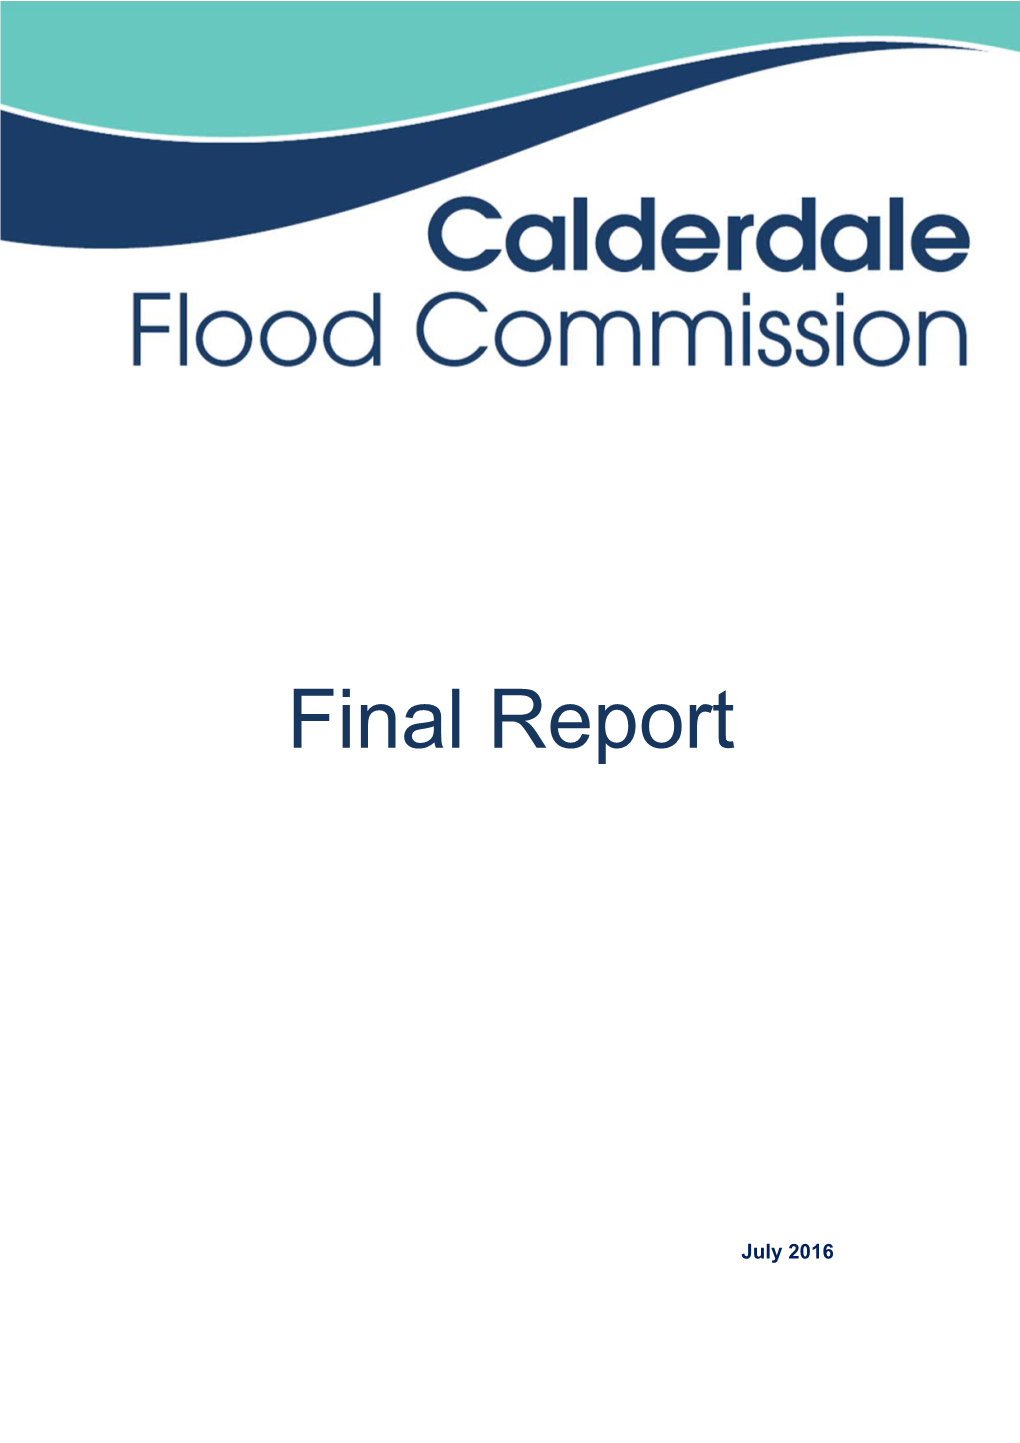 Following the Devastating Floods of Boxing Day, 2015, the Leader of Council Brought a Paper